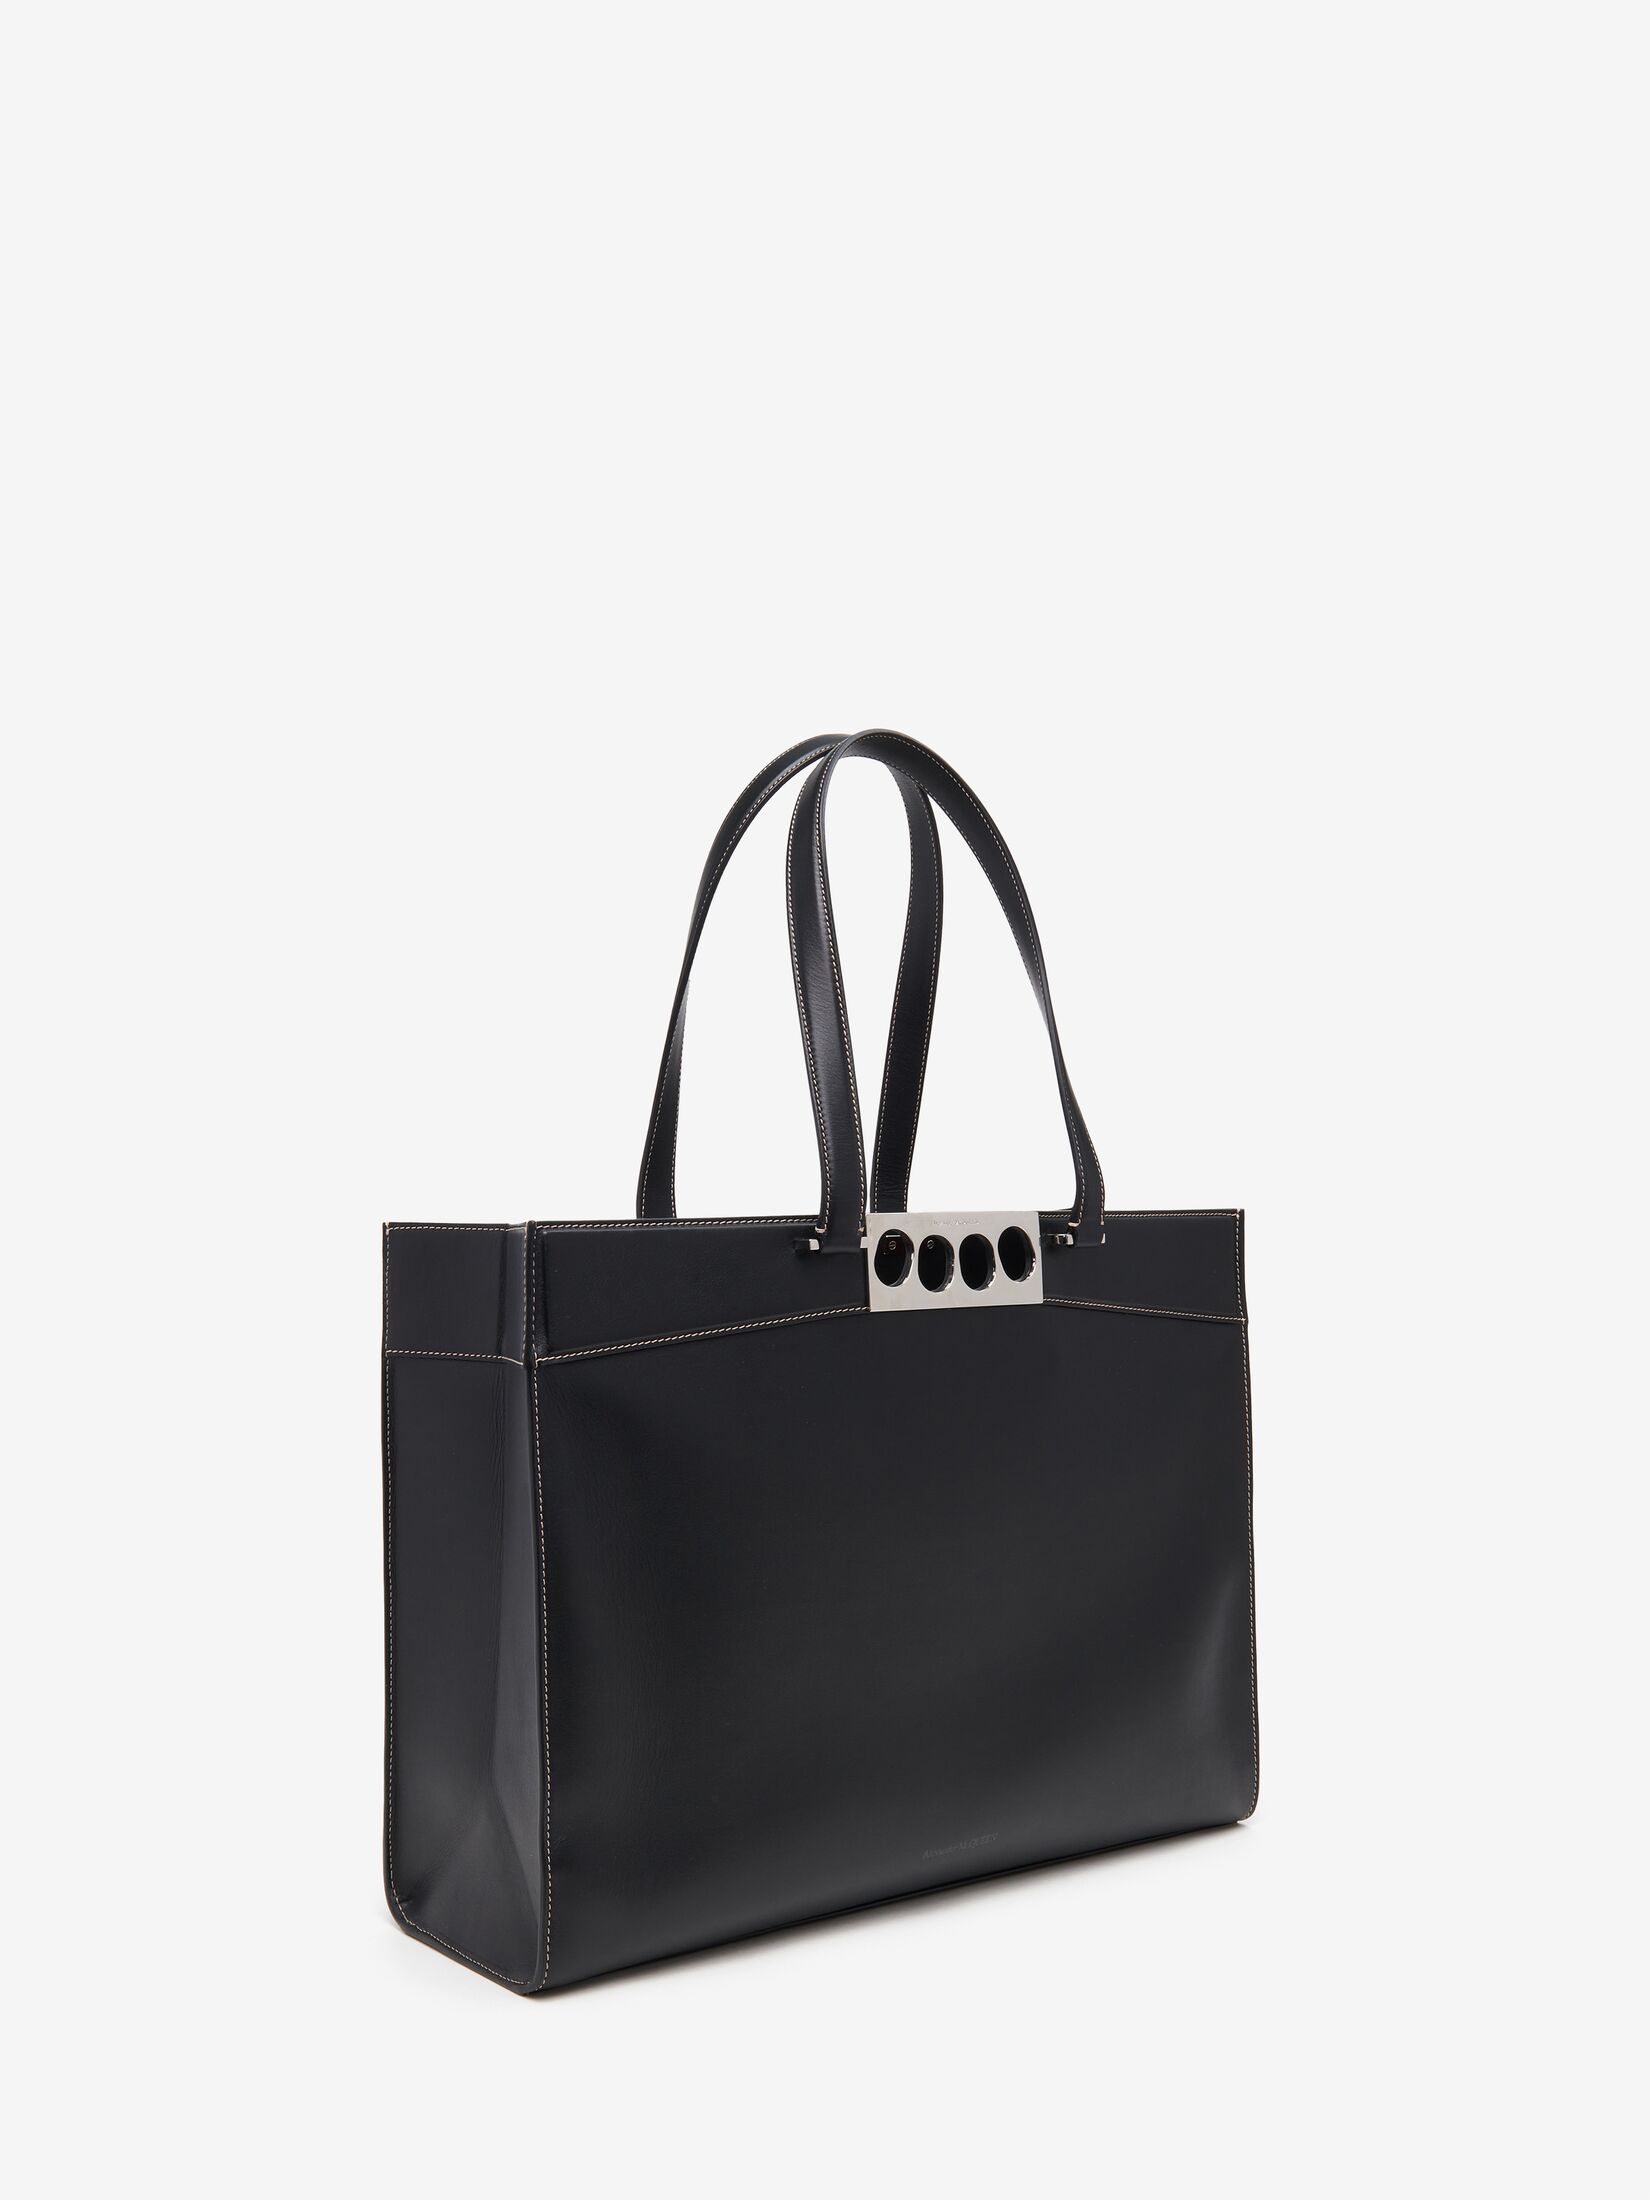 The Grip East West Tote